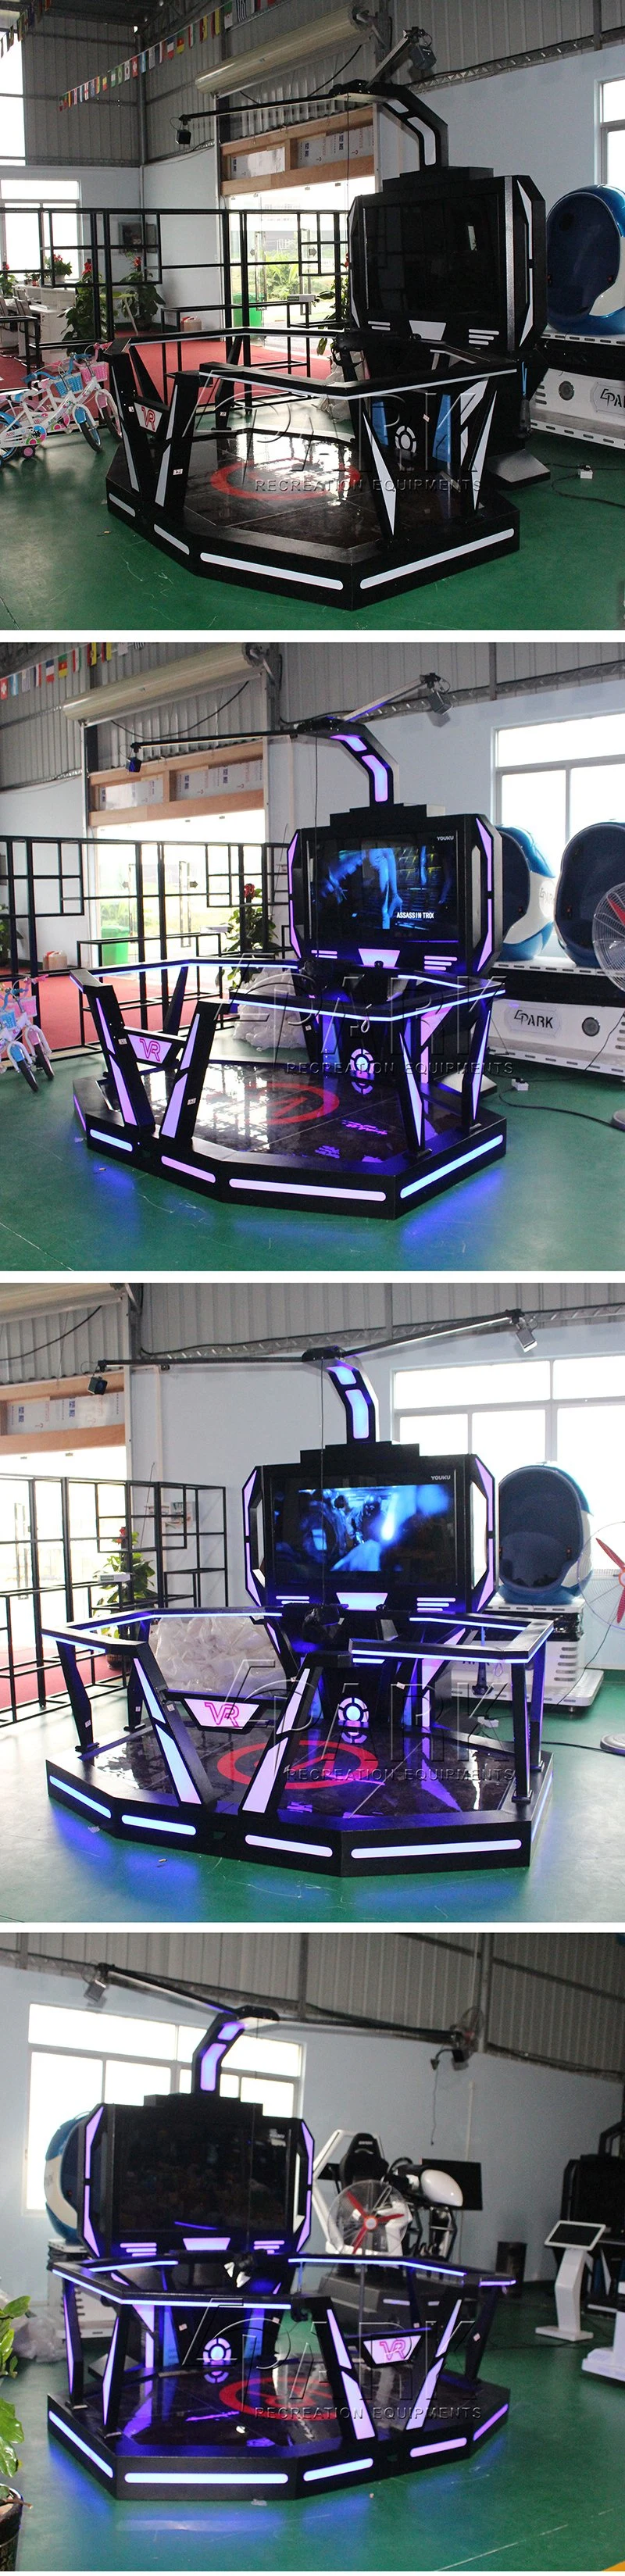 Colorful Space-Time Vr Space Walking Platform Game Machine for Game Center